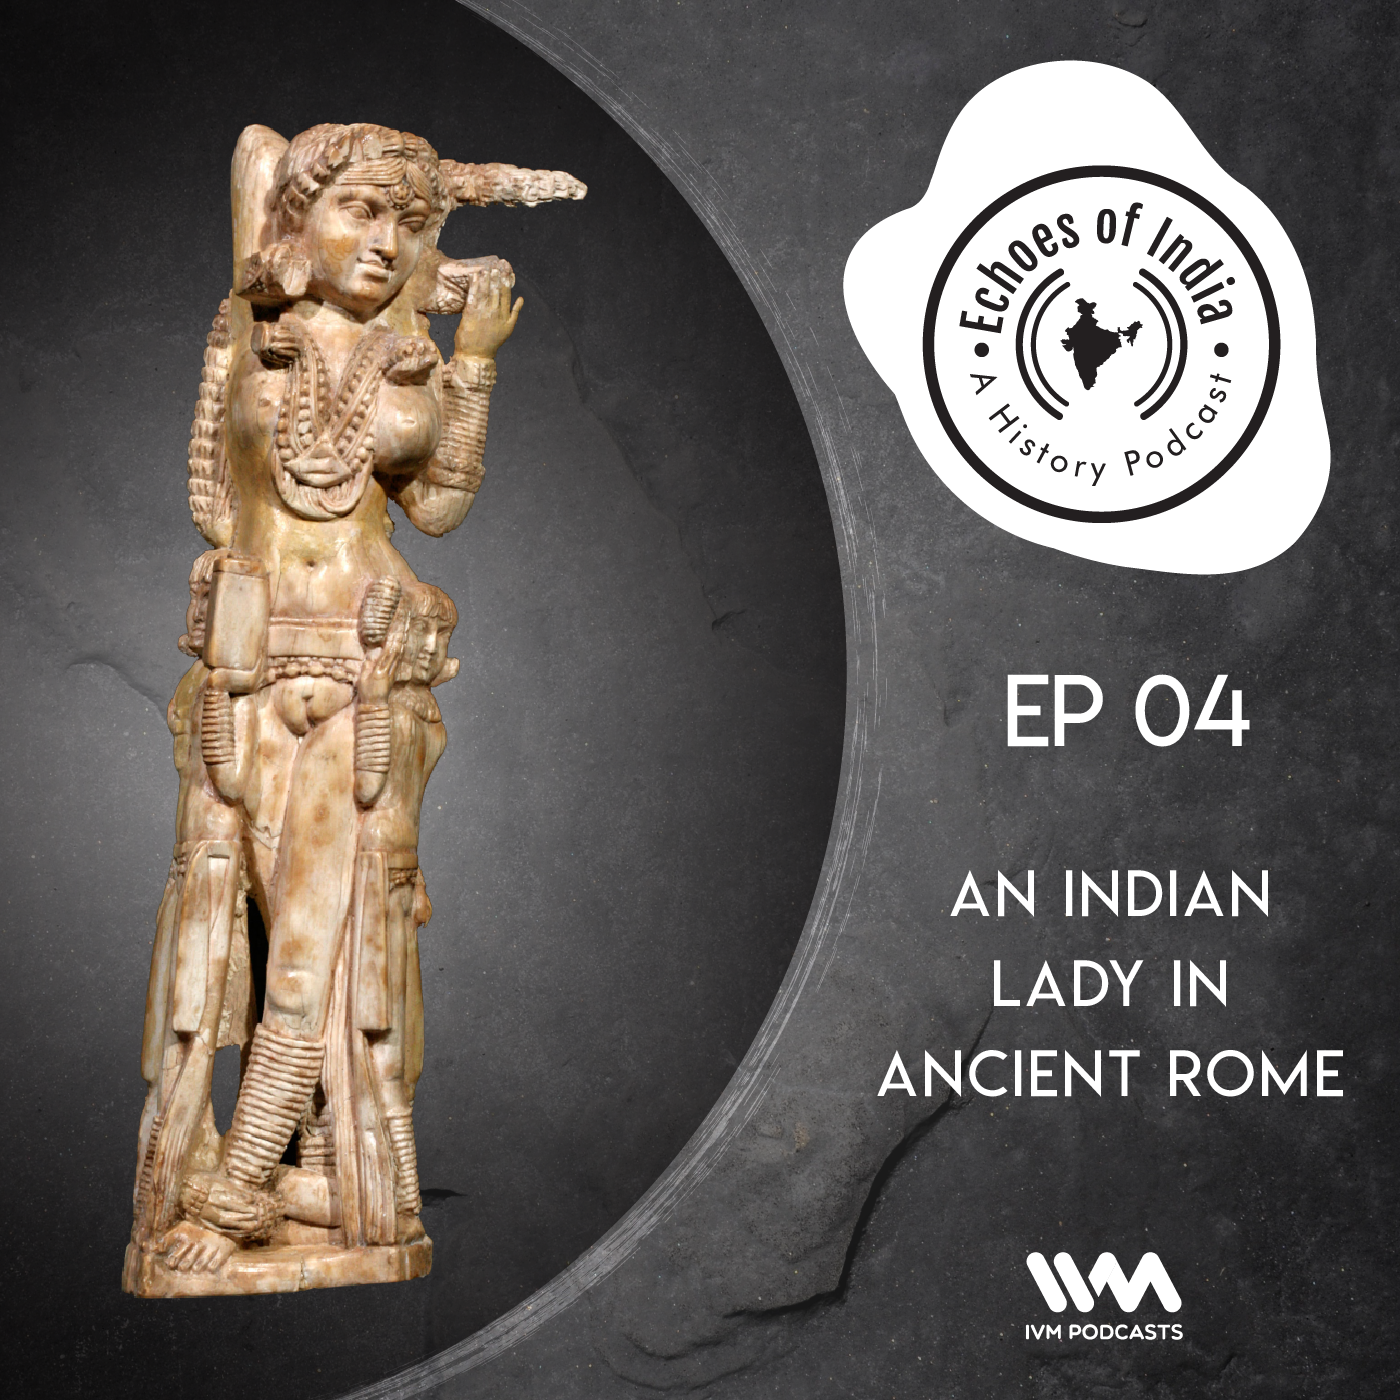 An Indian Lady in Ancient Rome